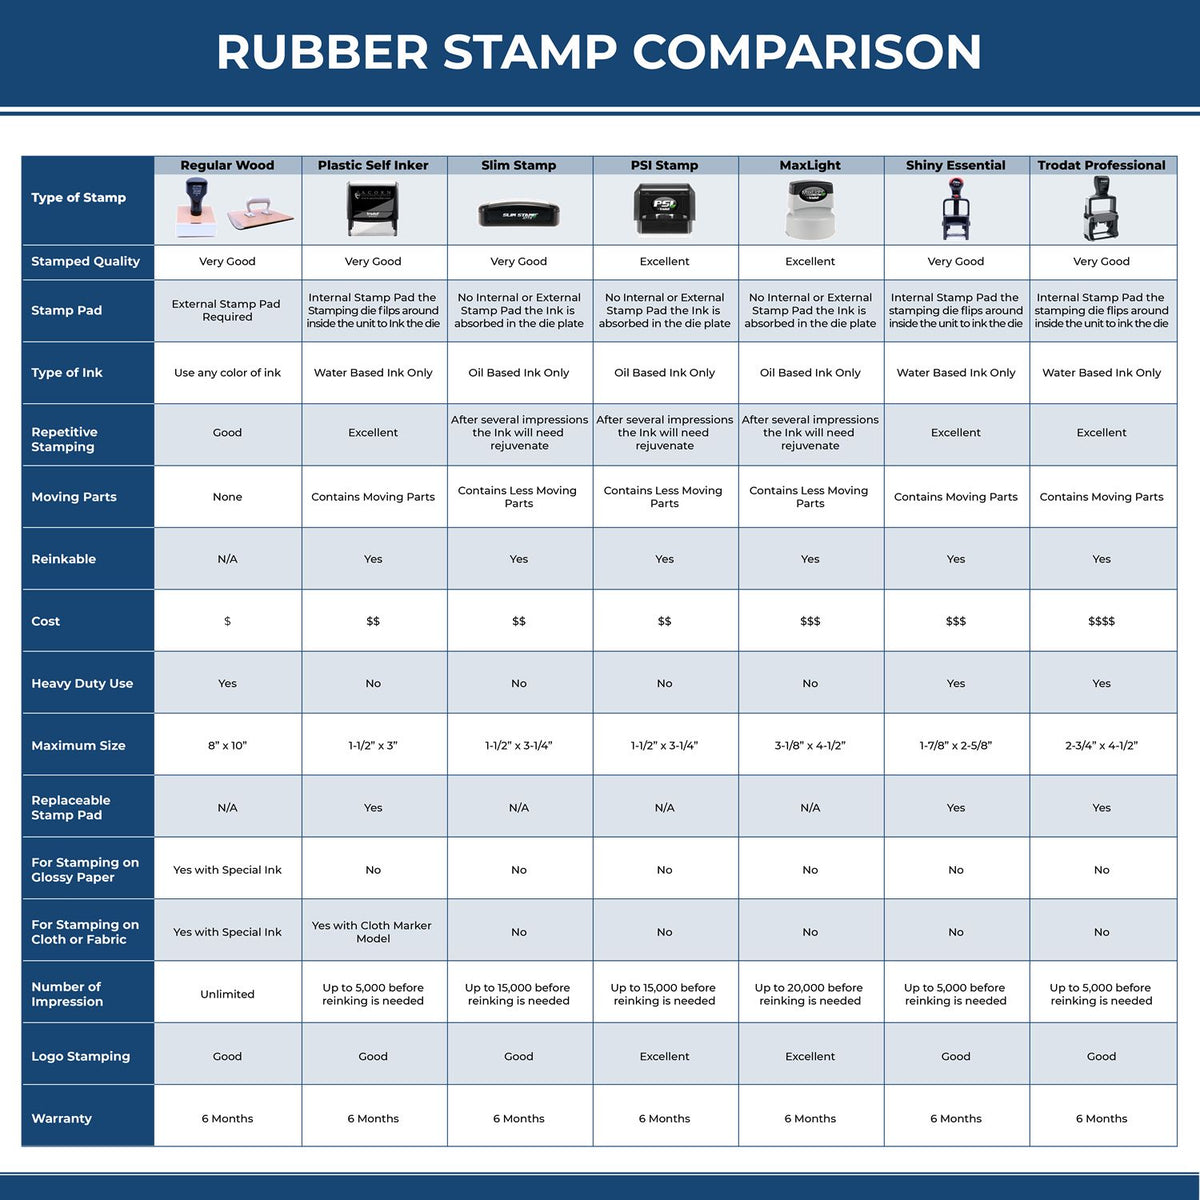 Large Self Inking Cod Stamp 4106S Rubber Stamp Comparison